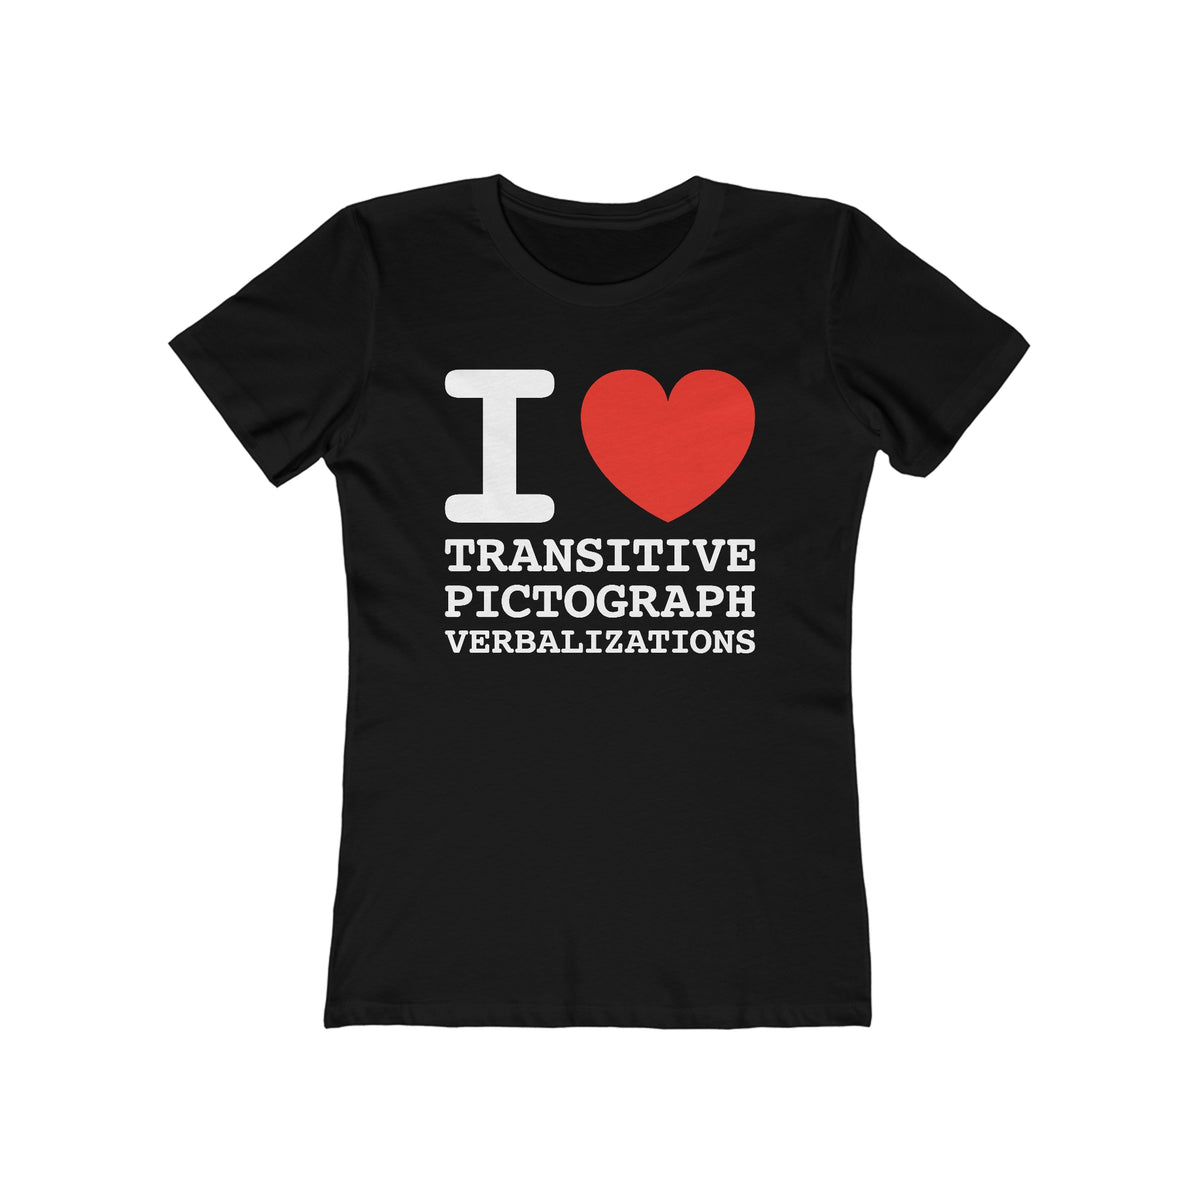 I Heart Transitive Pictograph Verbalizations - Women’s T-Shirt